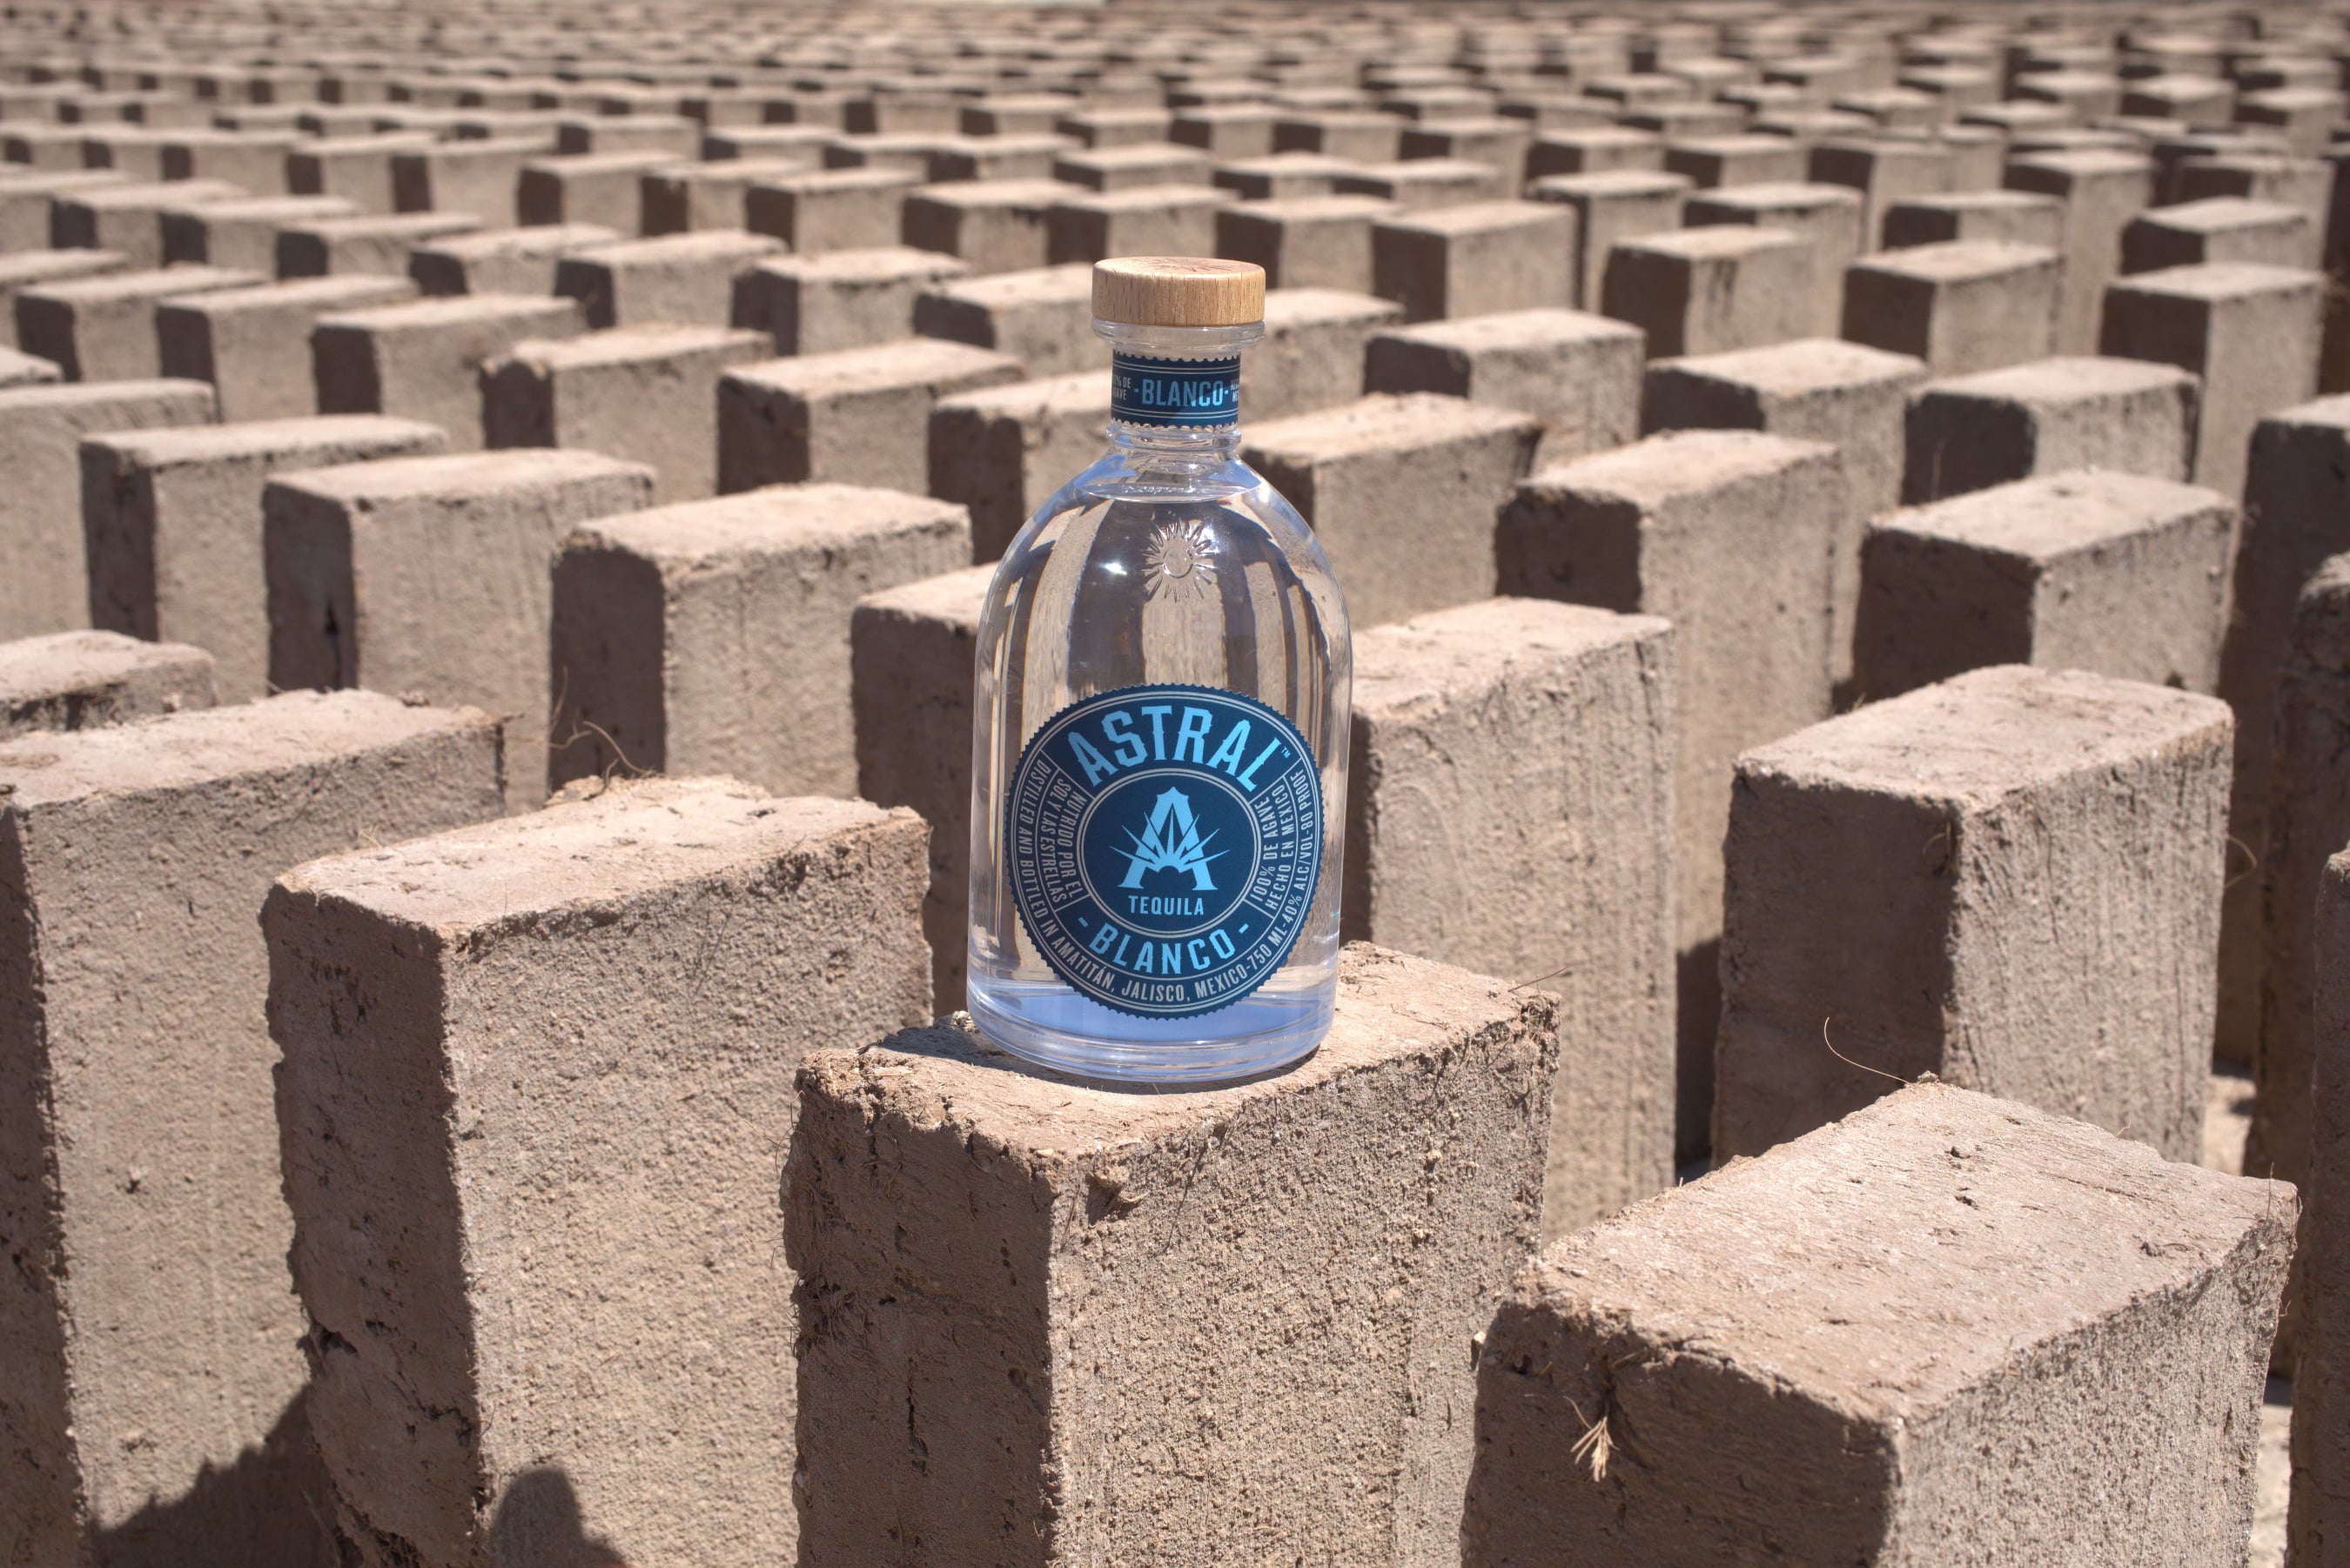 ASTRAL TEQUILA LAUNCHES 'THIS ROUND'S FOR THE HOUSE' INITIATIVE AS A PART OF ITS ONGOING UPCYCLING PROGRAM, THE ADOBE BRICK PROJECT, TO BUILD HOMES AND BRIGHTEN COMMUNITIES IN MEXICO